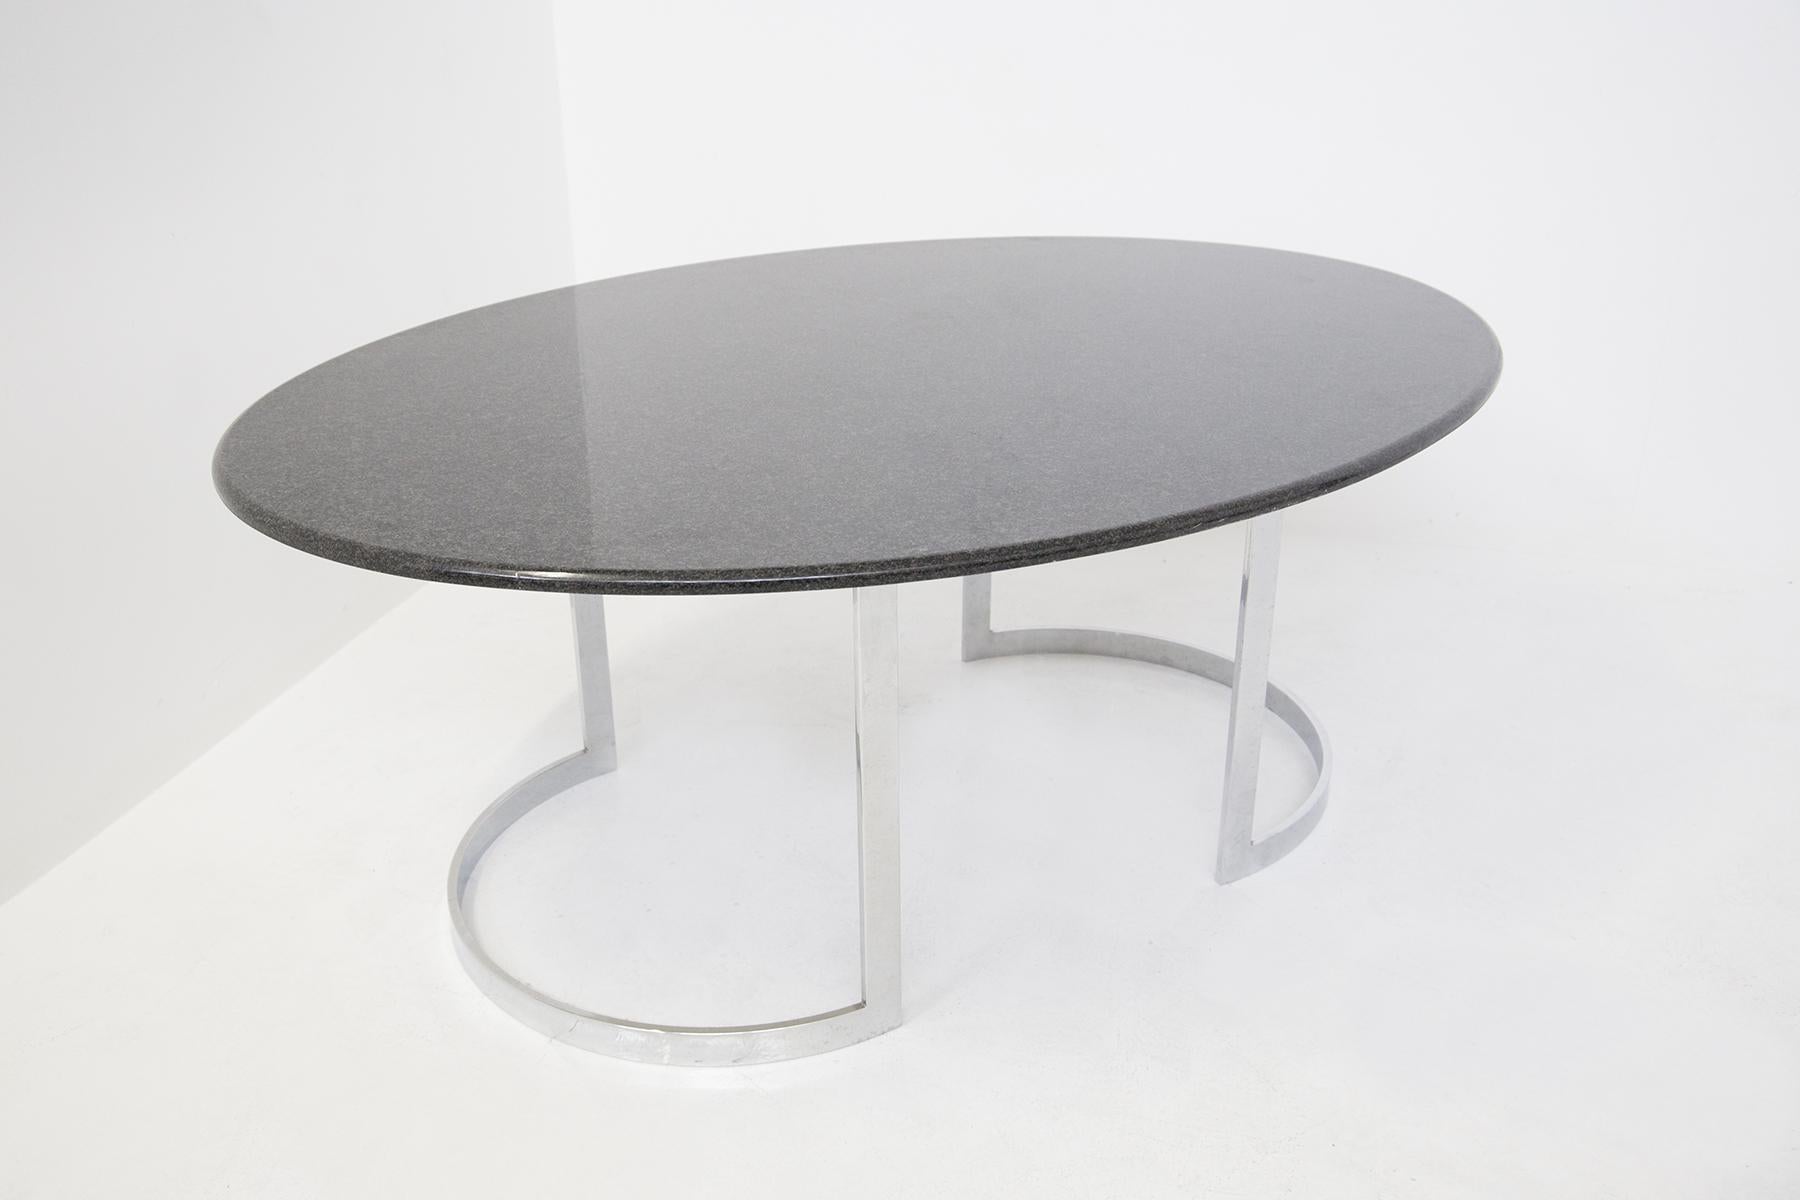 Steel Marble and Chromed Metal Table by Vittorio Introini for Residence Vips